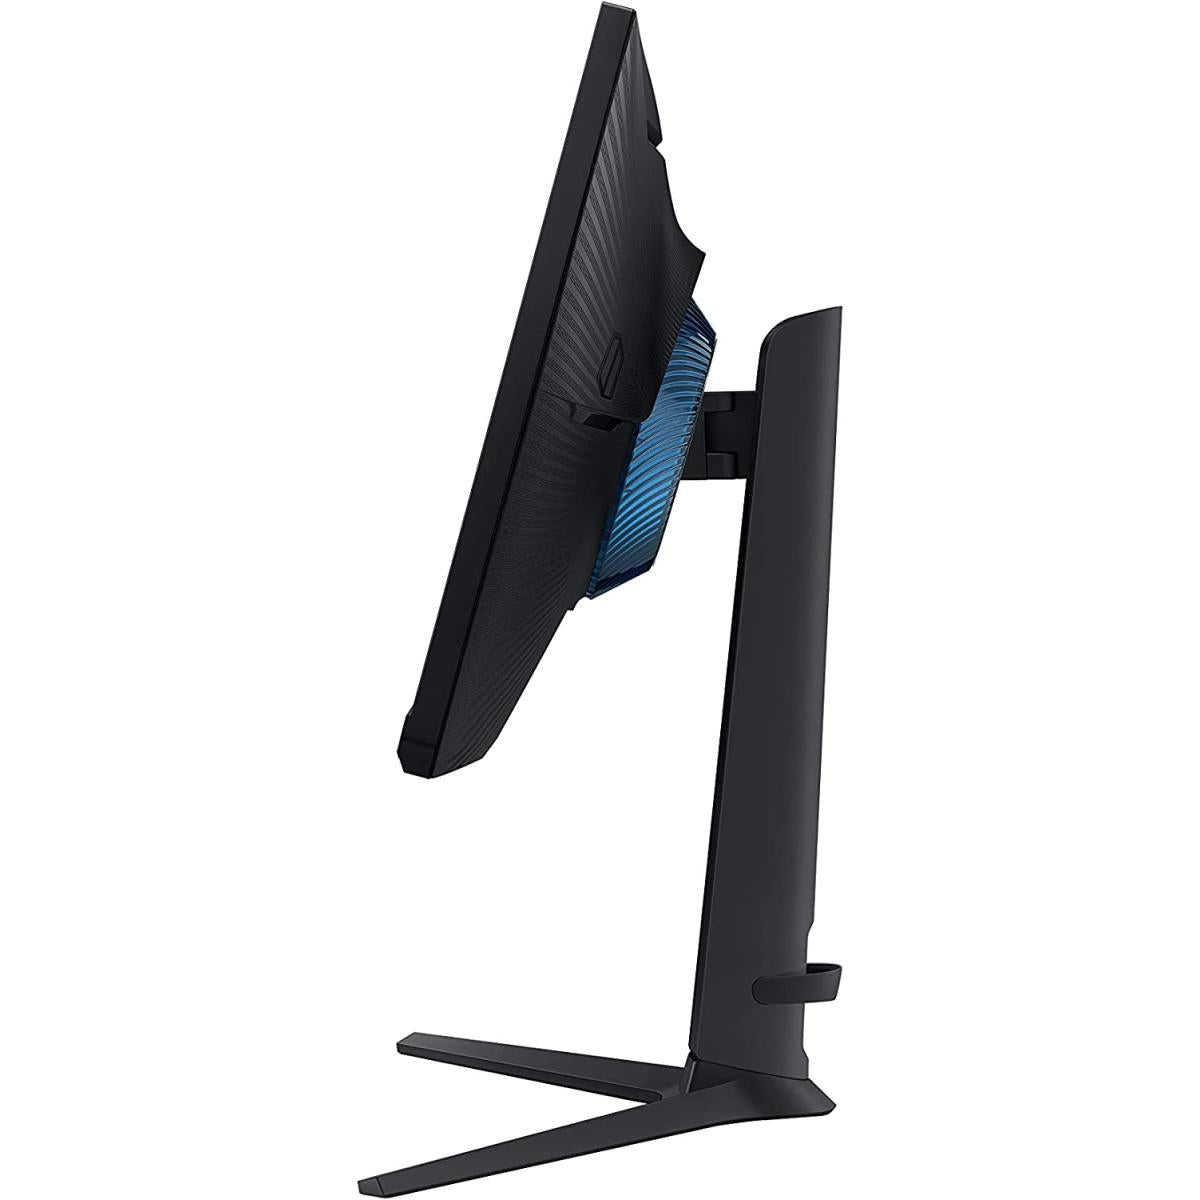 Samsung 24" G3 Odyssey Flat Gaming FHD Monitor with 165Hz Refresh Rate